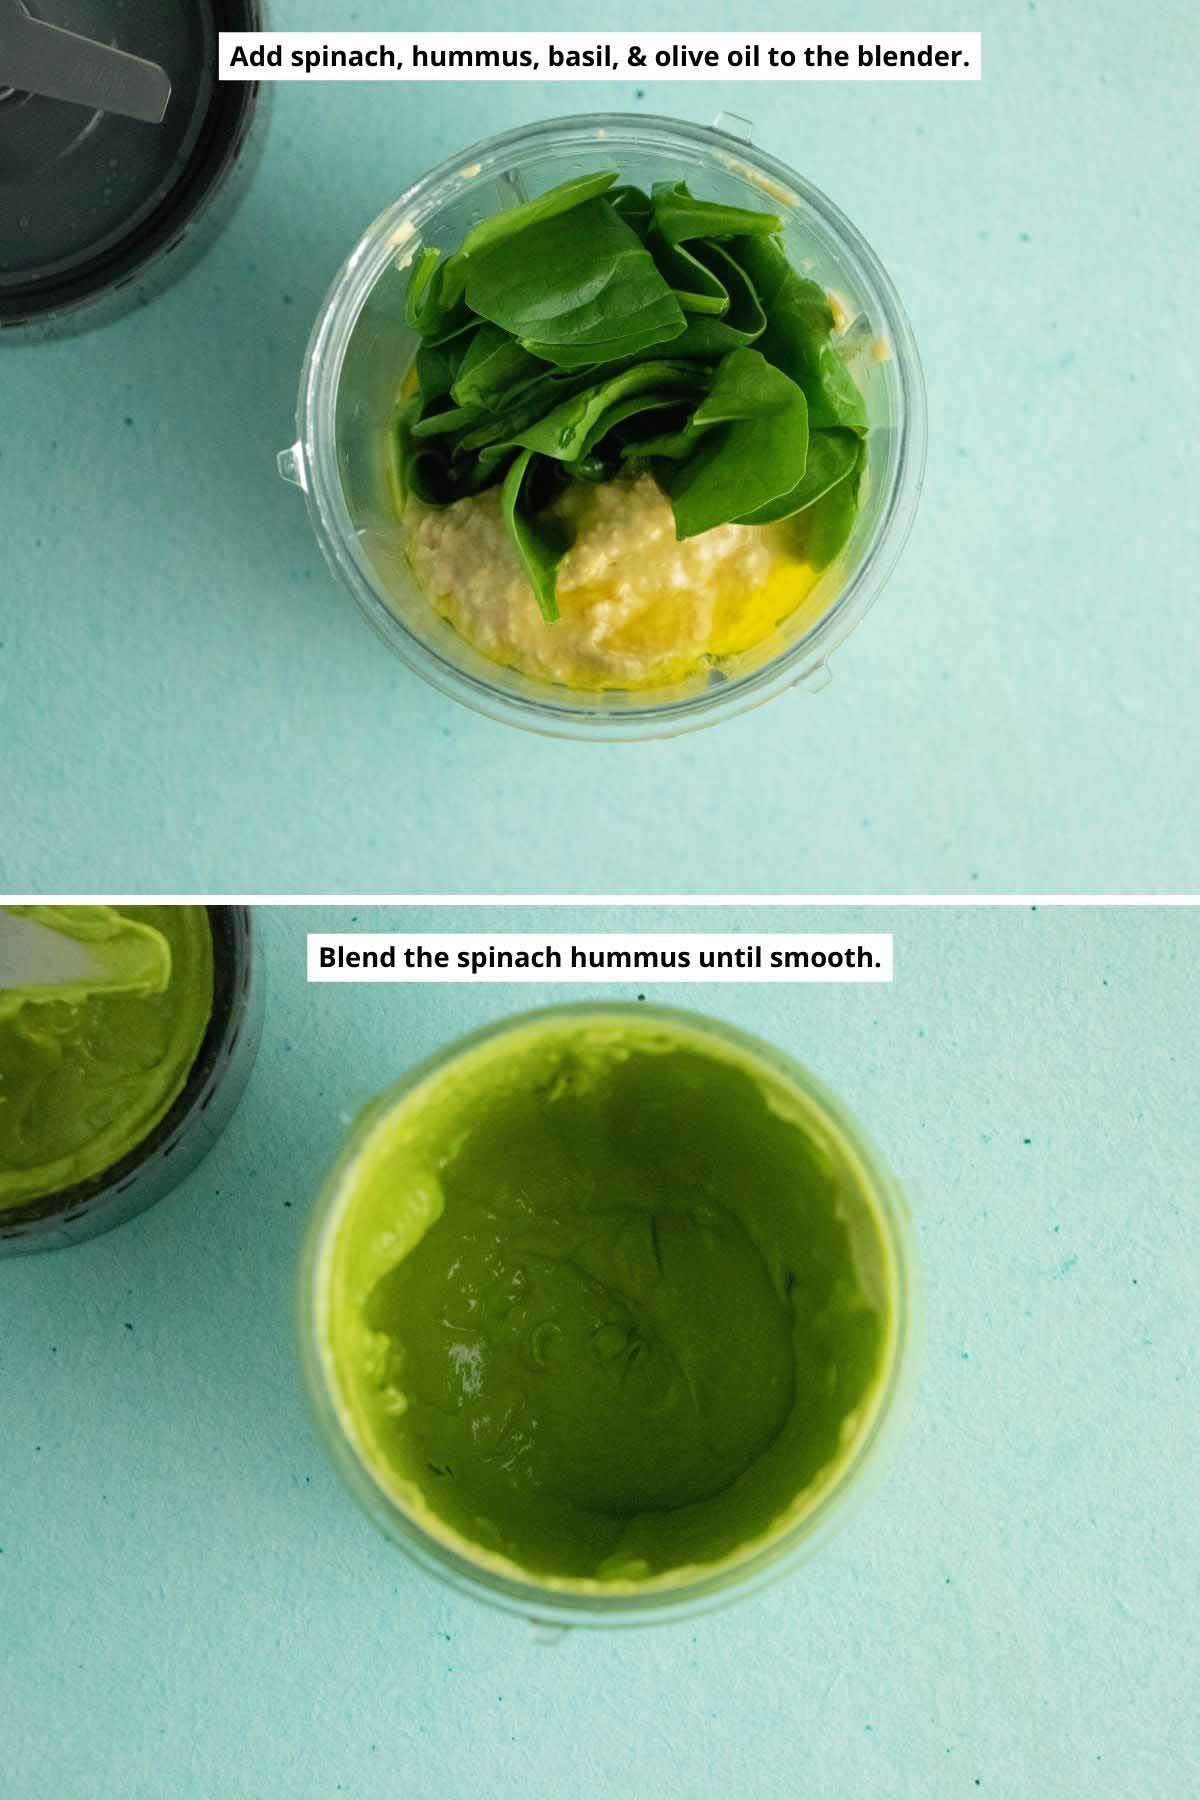 image collage showing the spinach hummus ingredients in the blender before and after blending